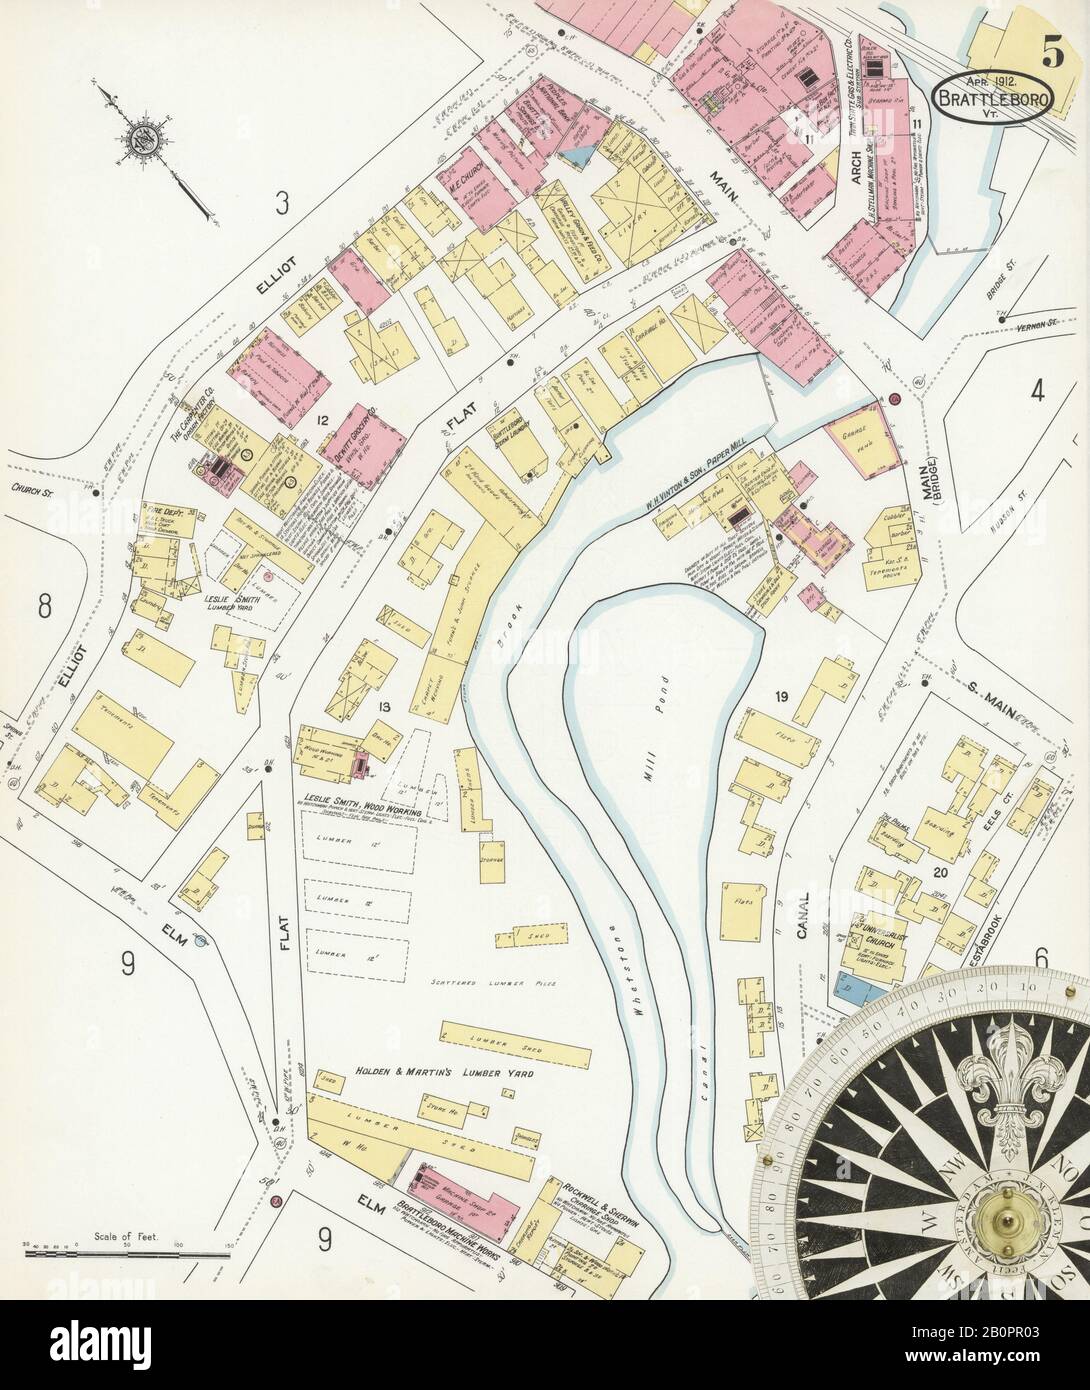 Image 5 of Sanborn Fire Insurance Map from Brattleboro, Windham County, Vermont. Apr 1912. 17 Sheet(s), America, street map with a Nineteenth Century compass Stock Photo